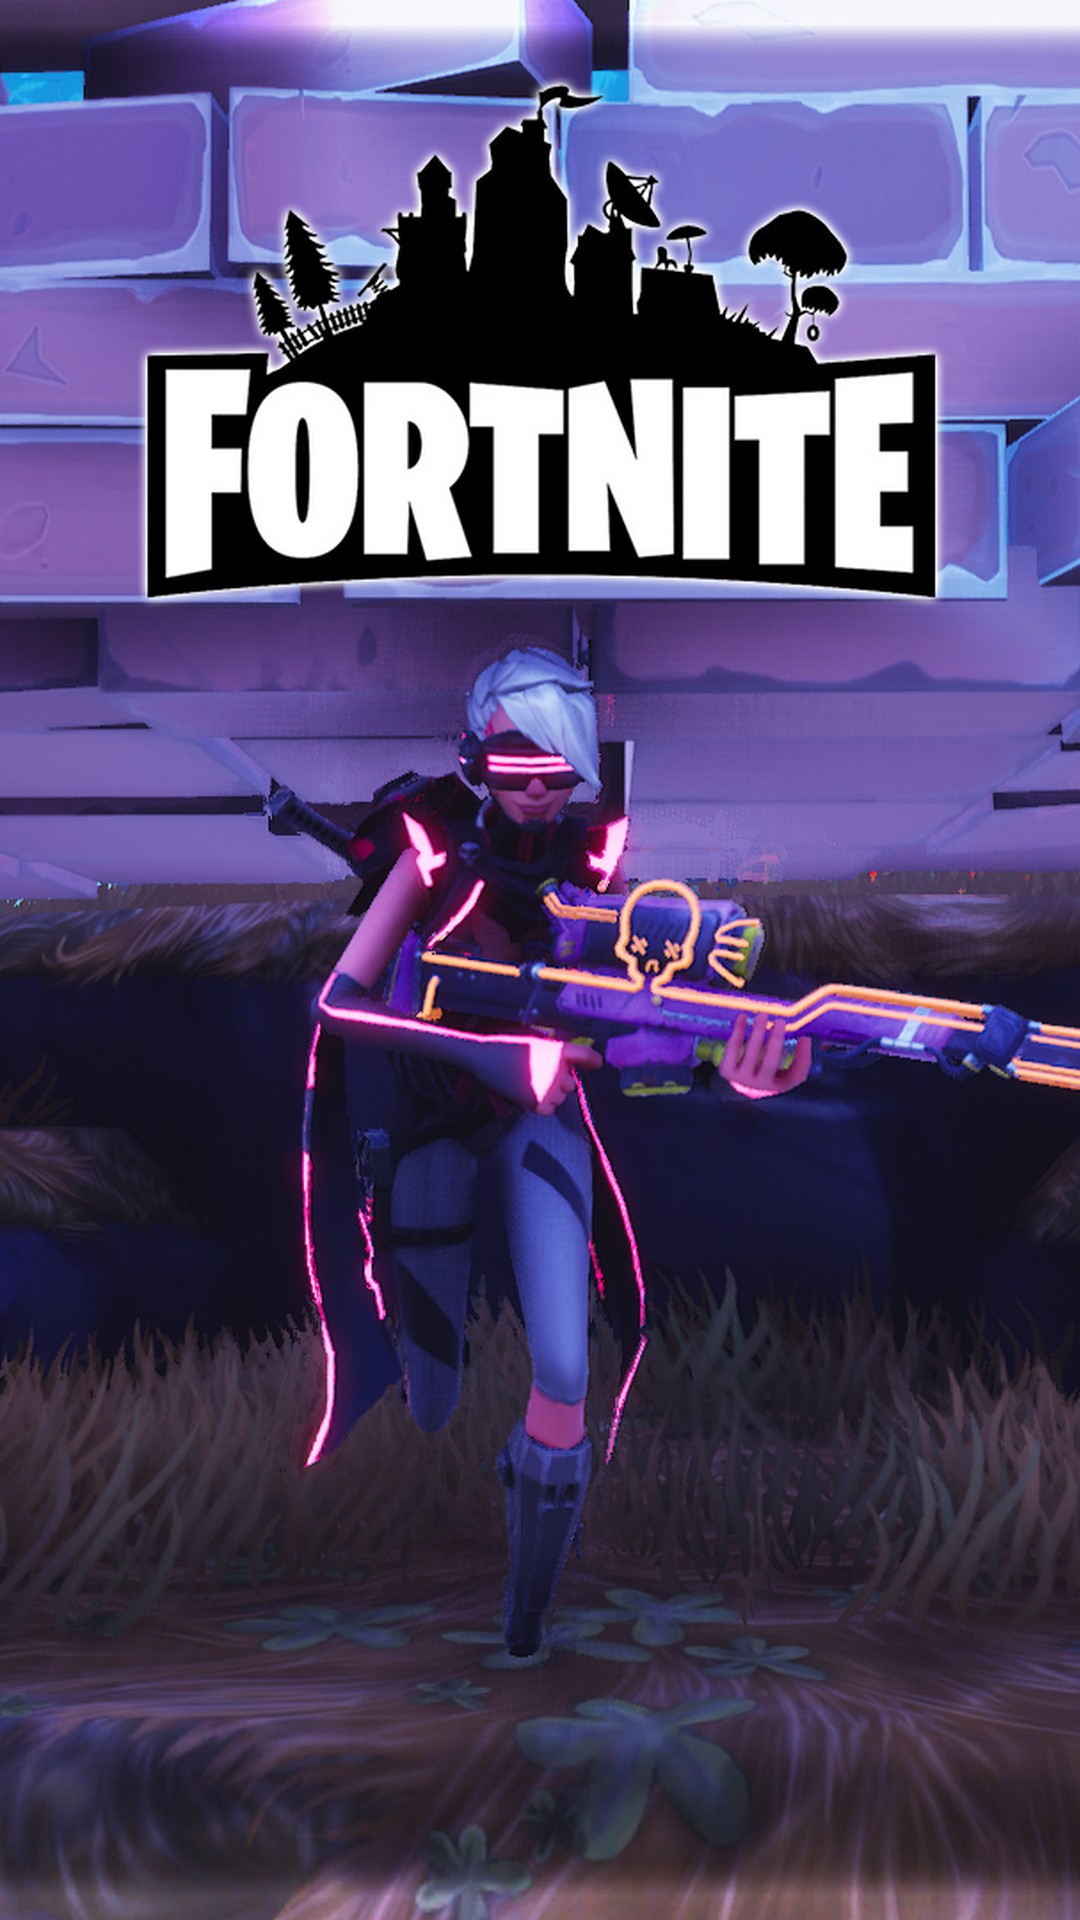 Fortnite iPhone X Wallpaper With high-resolution 1080X1920 pixel. You can use this wallpaper for your iPhone 5, 6, 7, 8, X, XS, XR backgrounds, Mobile Screensaver, or iPad Lock Screen